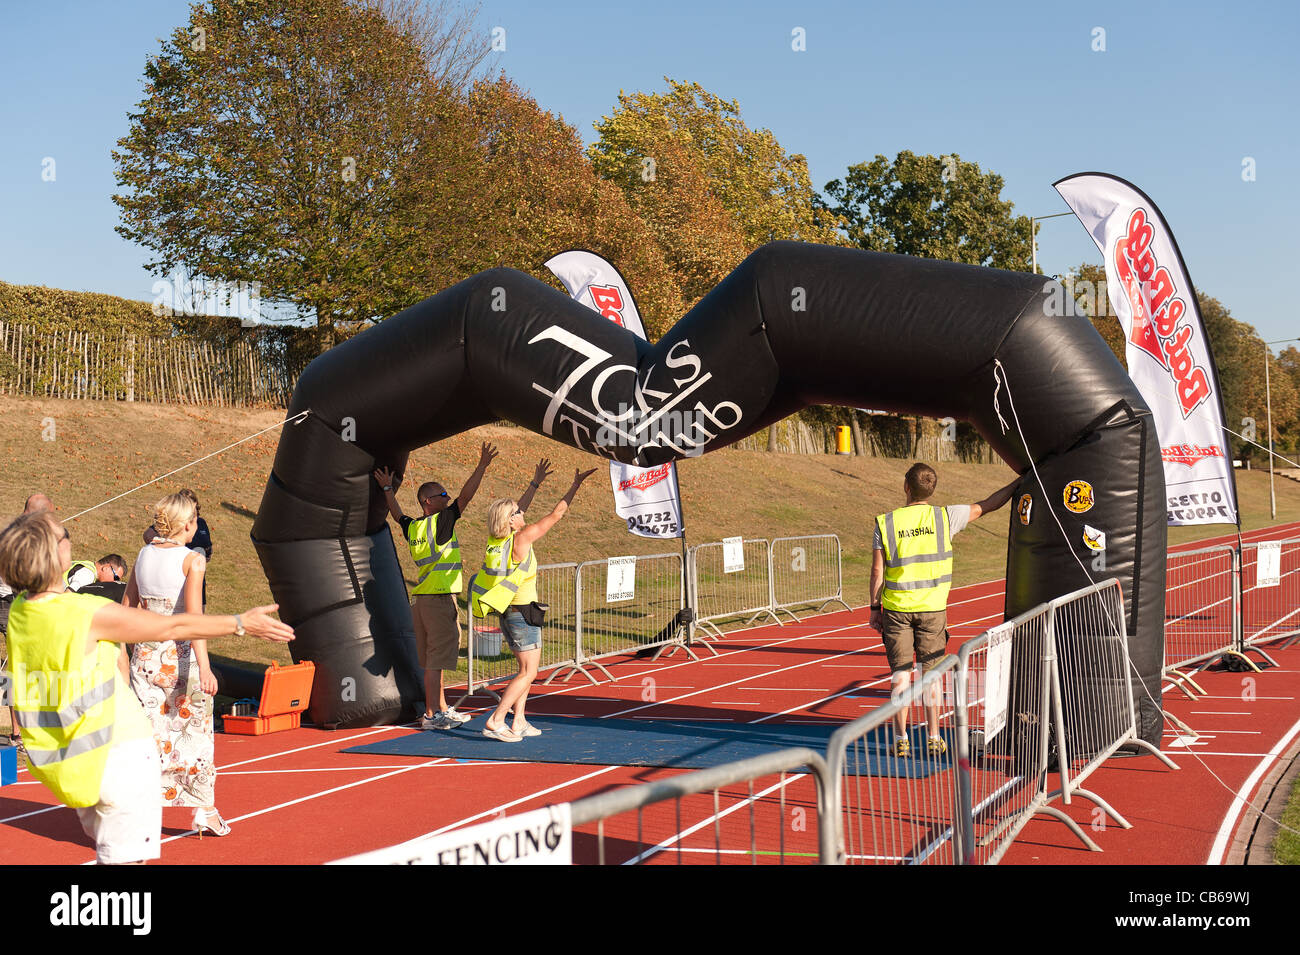 Hot sunny day makes fan overheat resulting in a deflating finishing point to a triathlon, supporters hold it up for last runners Stock Photo